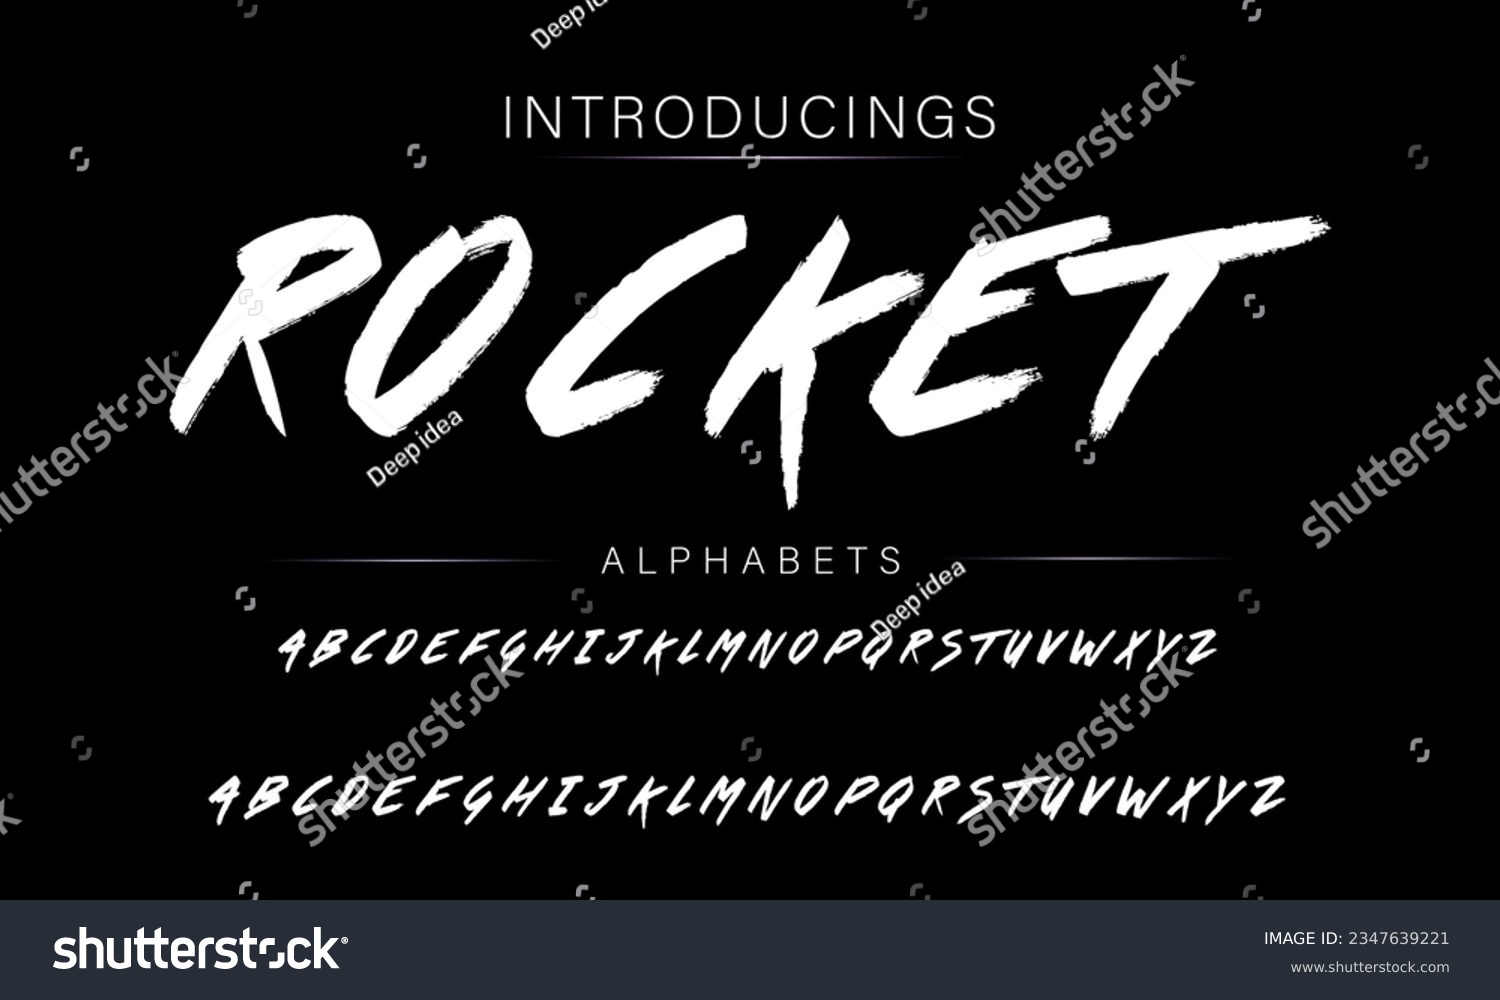 Rocket Handwritten Brush font for lettering quotes. Hand drawn brush style modern calligraphy. #2347639221